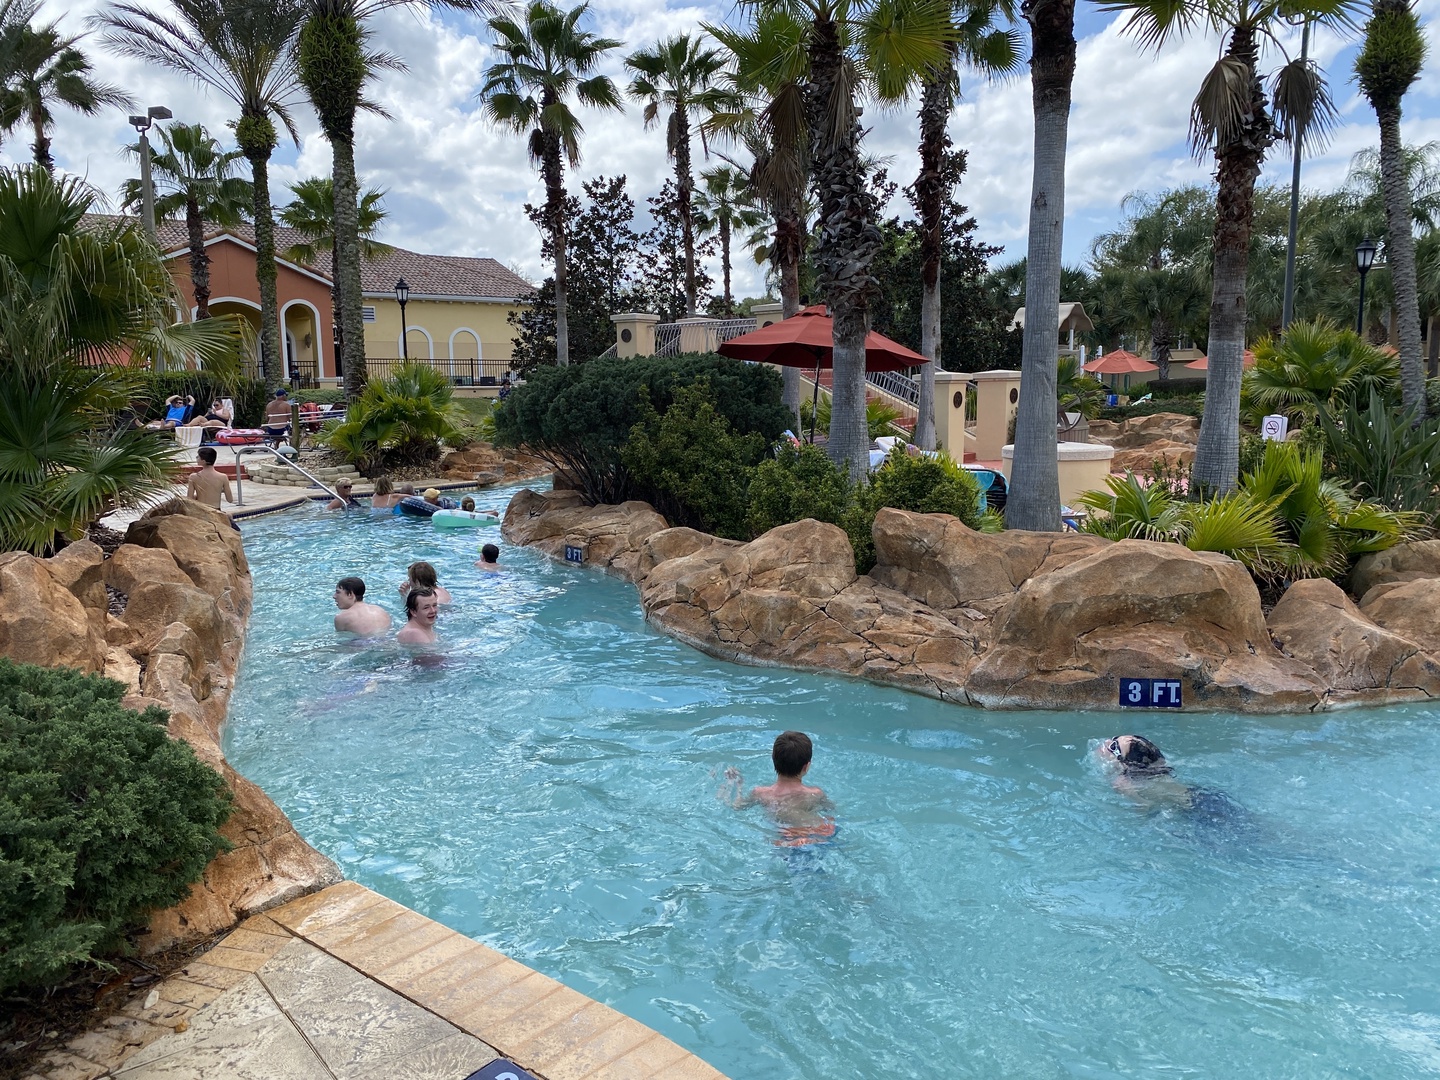 A resort that takes your family fun to a whole new level